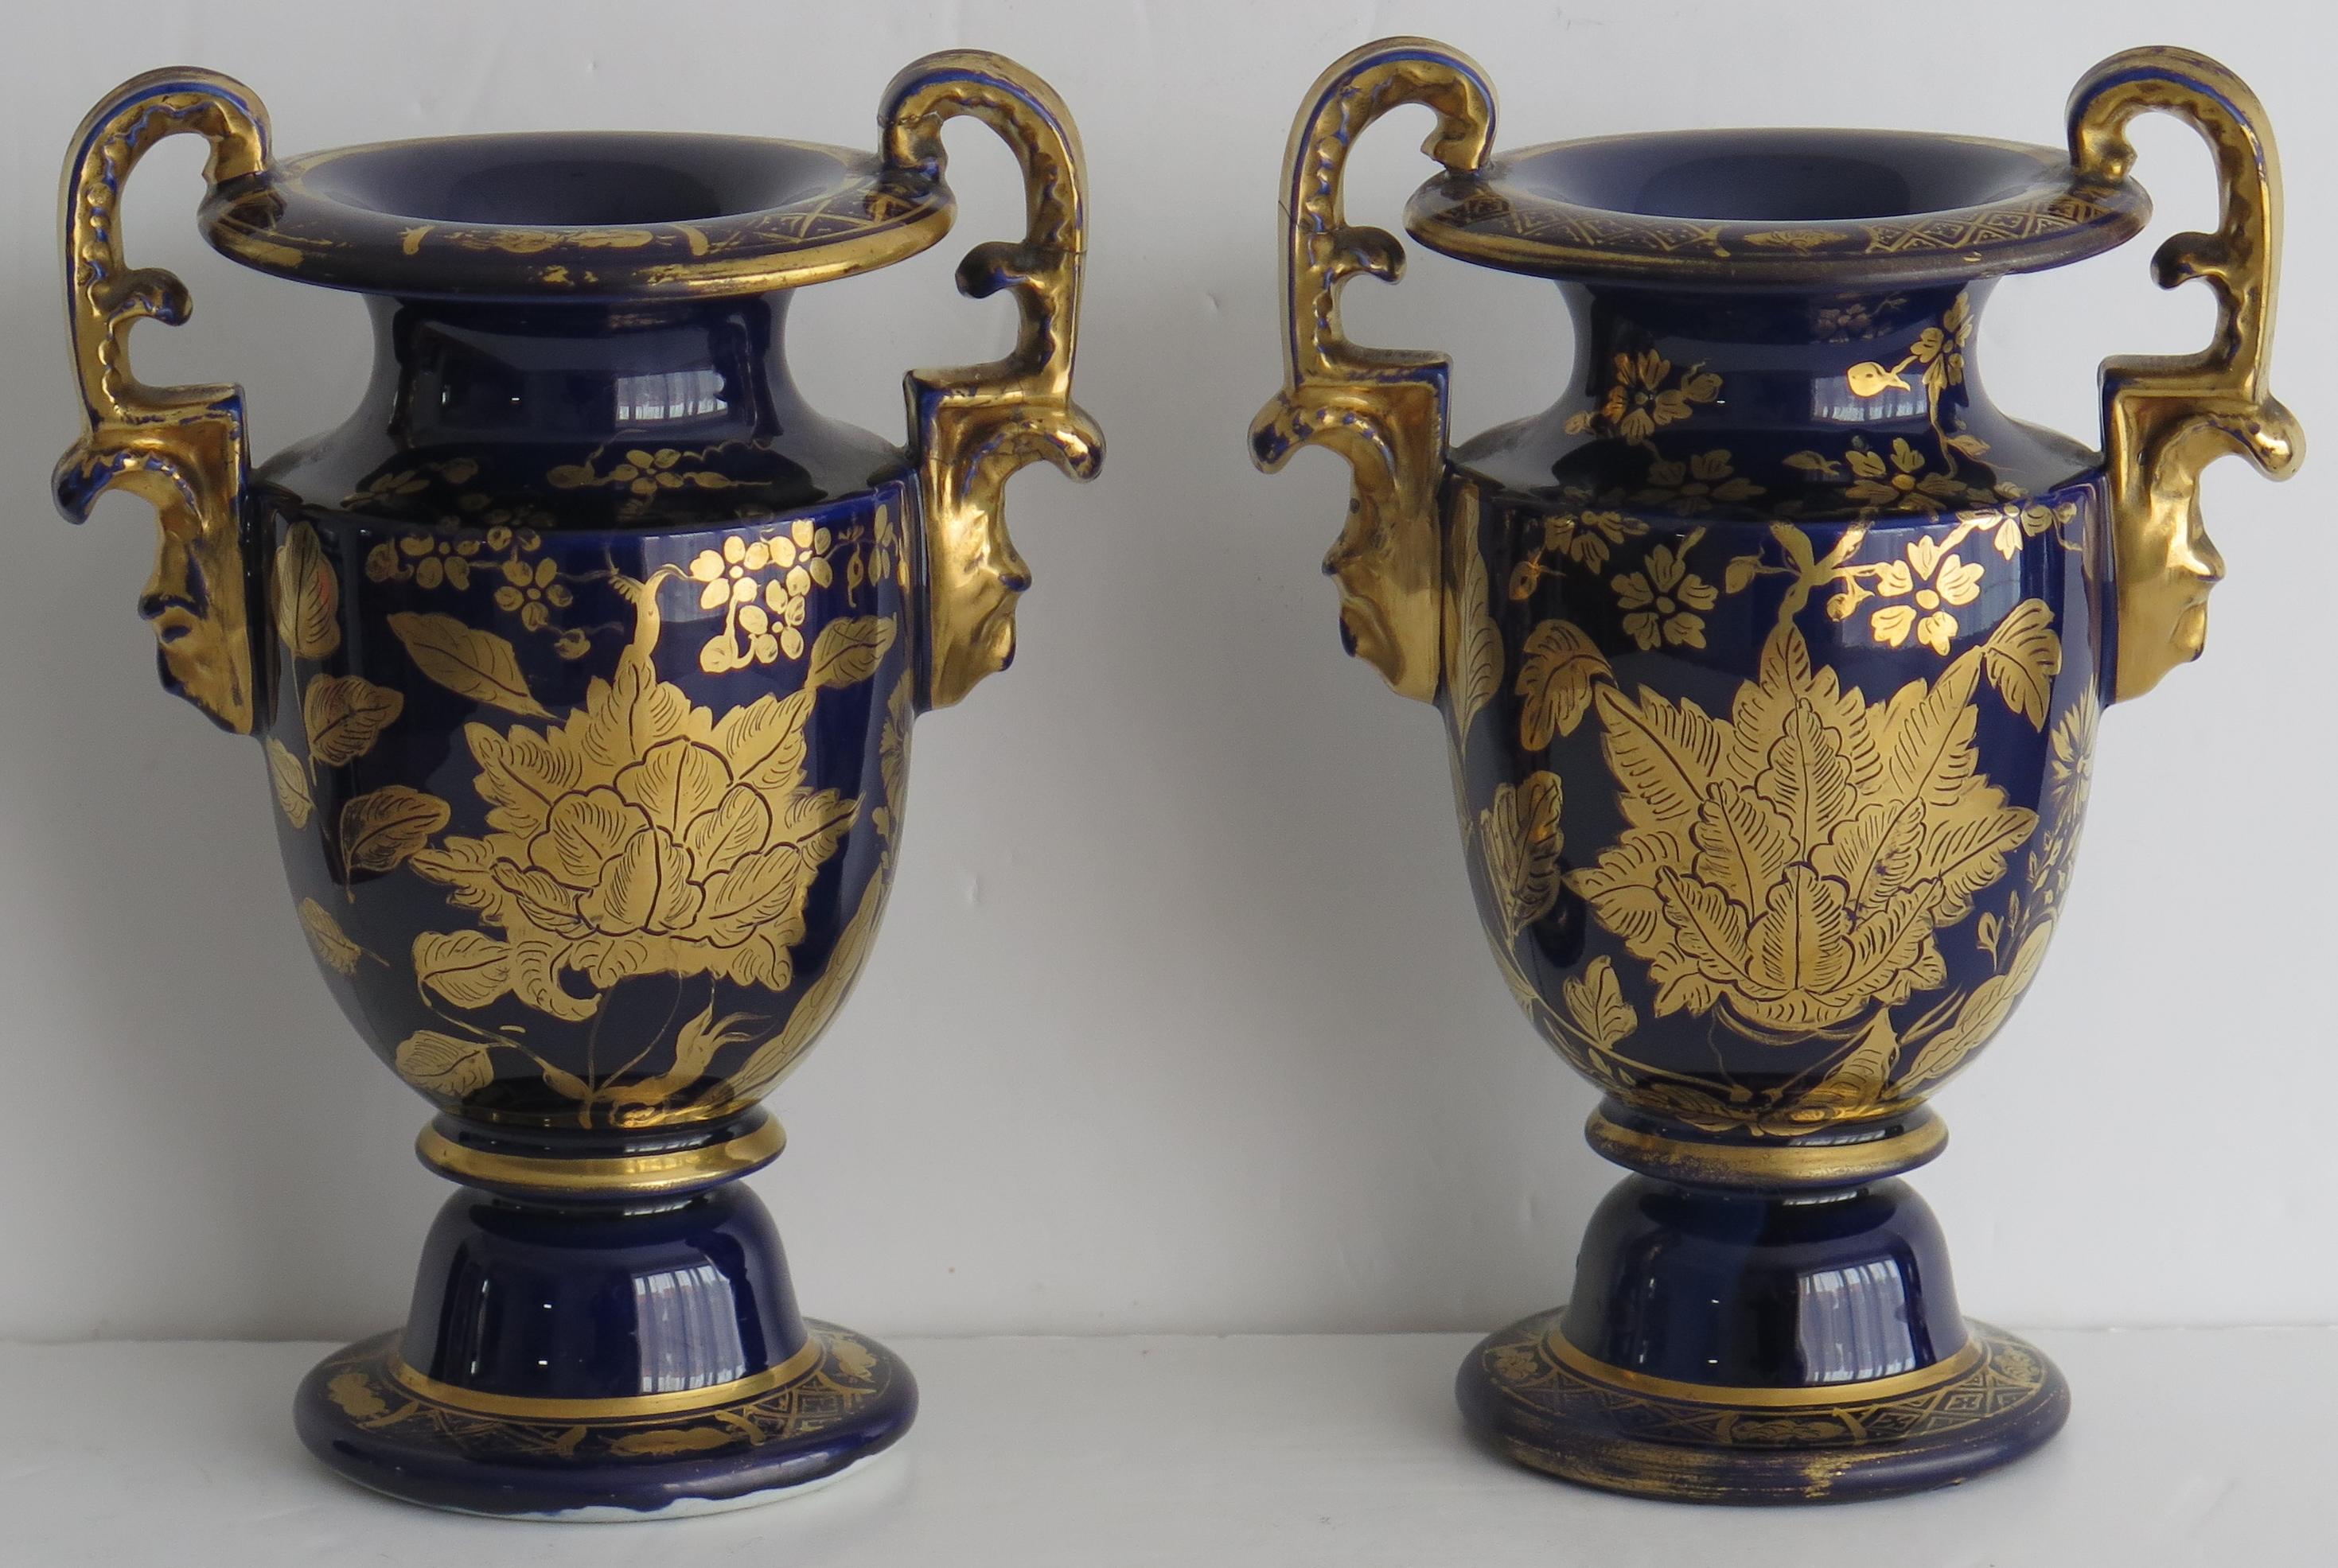 These are a rare pair of ironstone vase with high loop handles, made by the Mason's factory, England in the early 19th century, circa 1815 to 1820.

These footed vases are potted in a rare shape with two elaborately moulded side handles, giving a